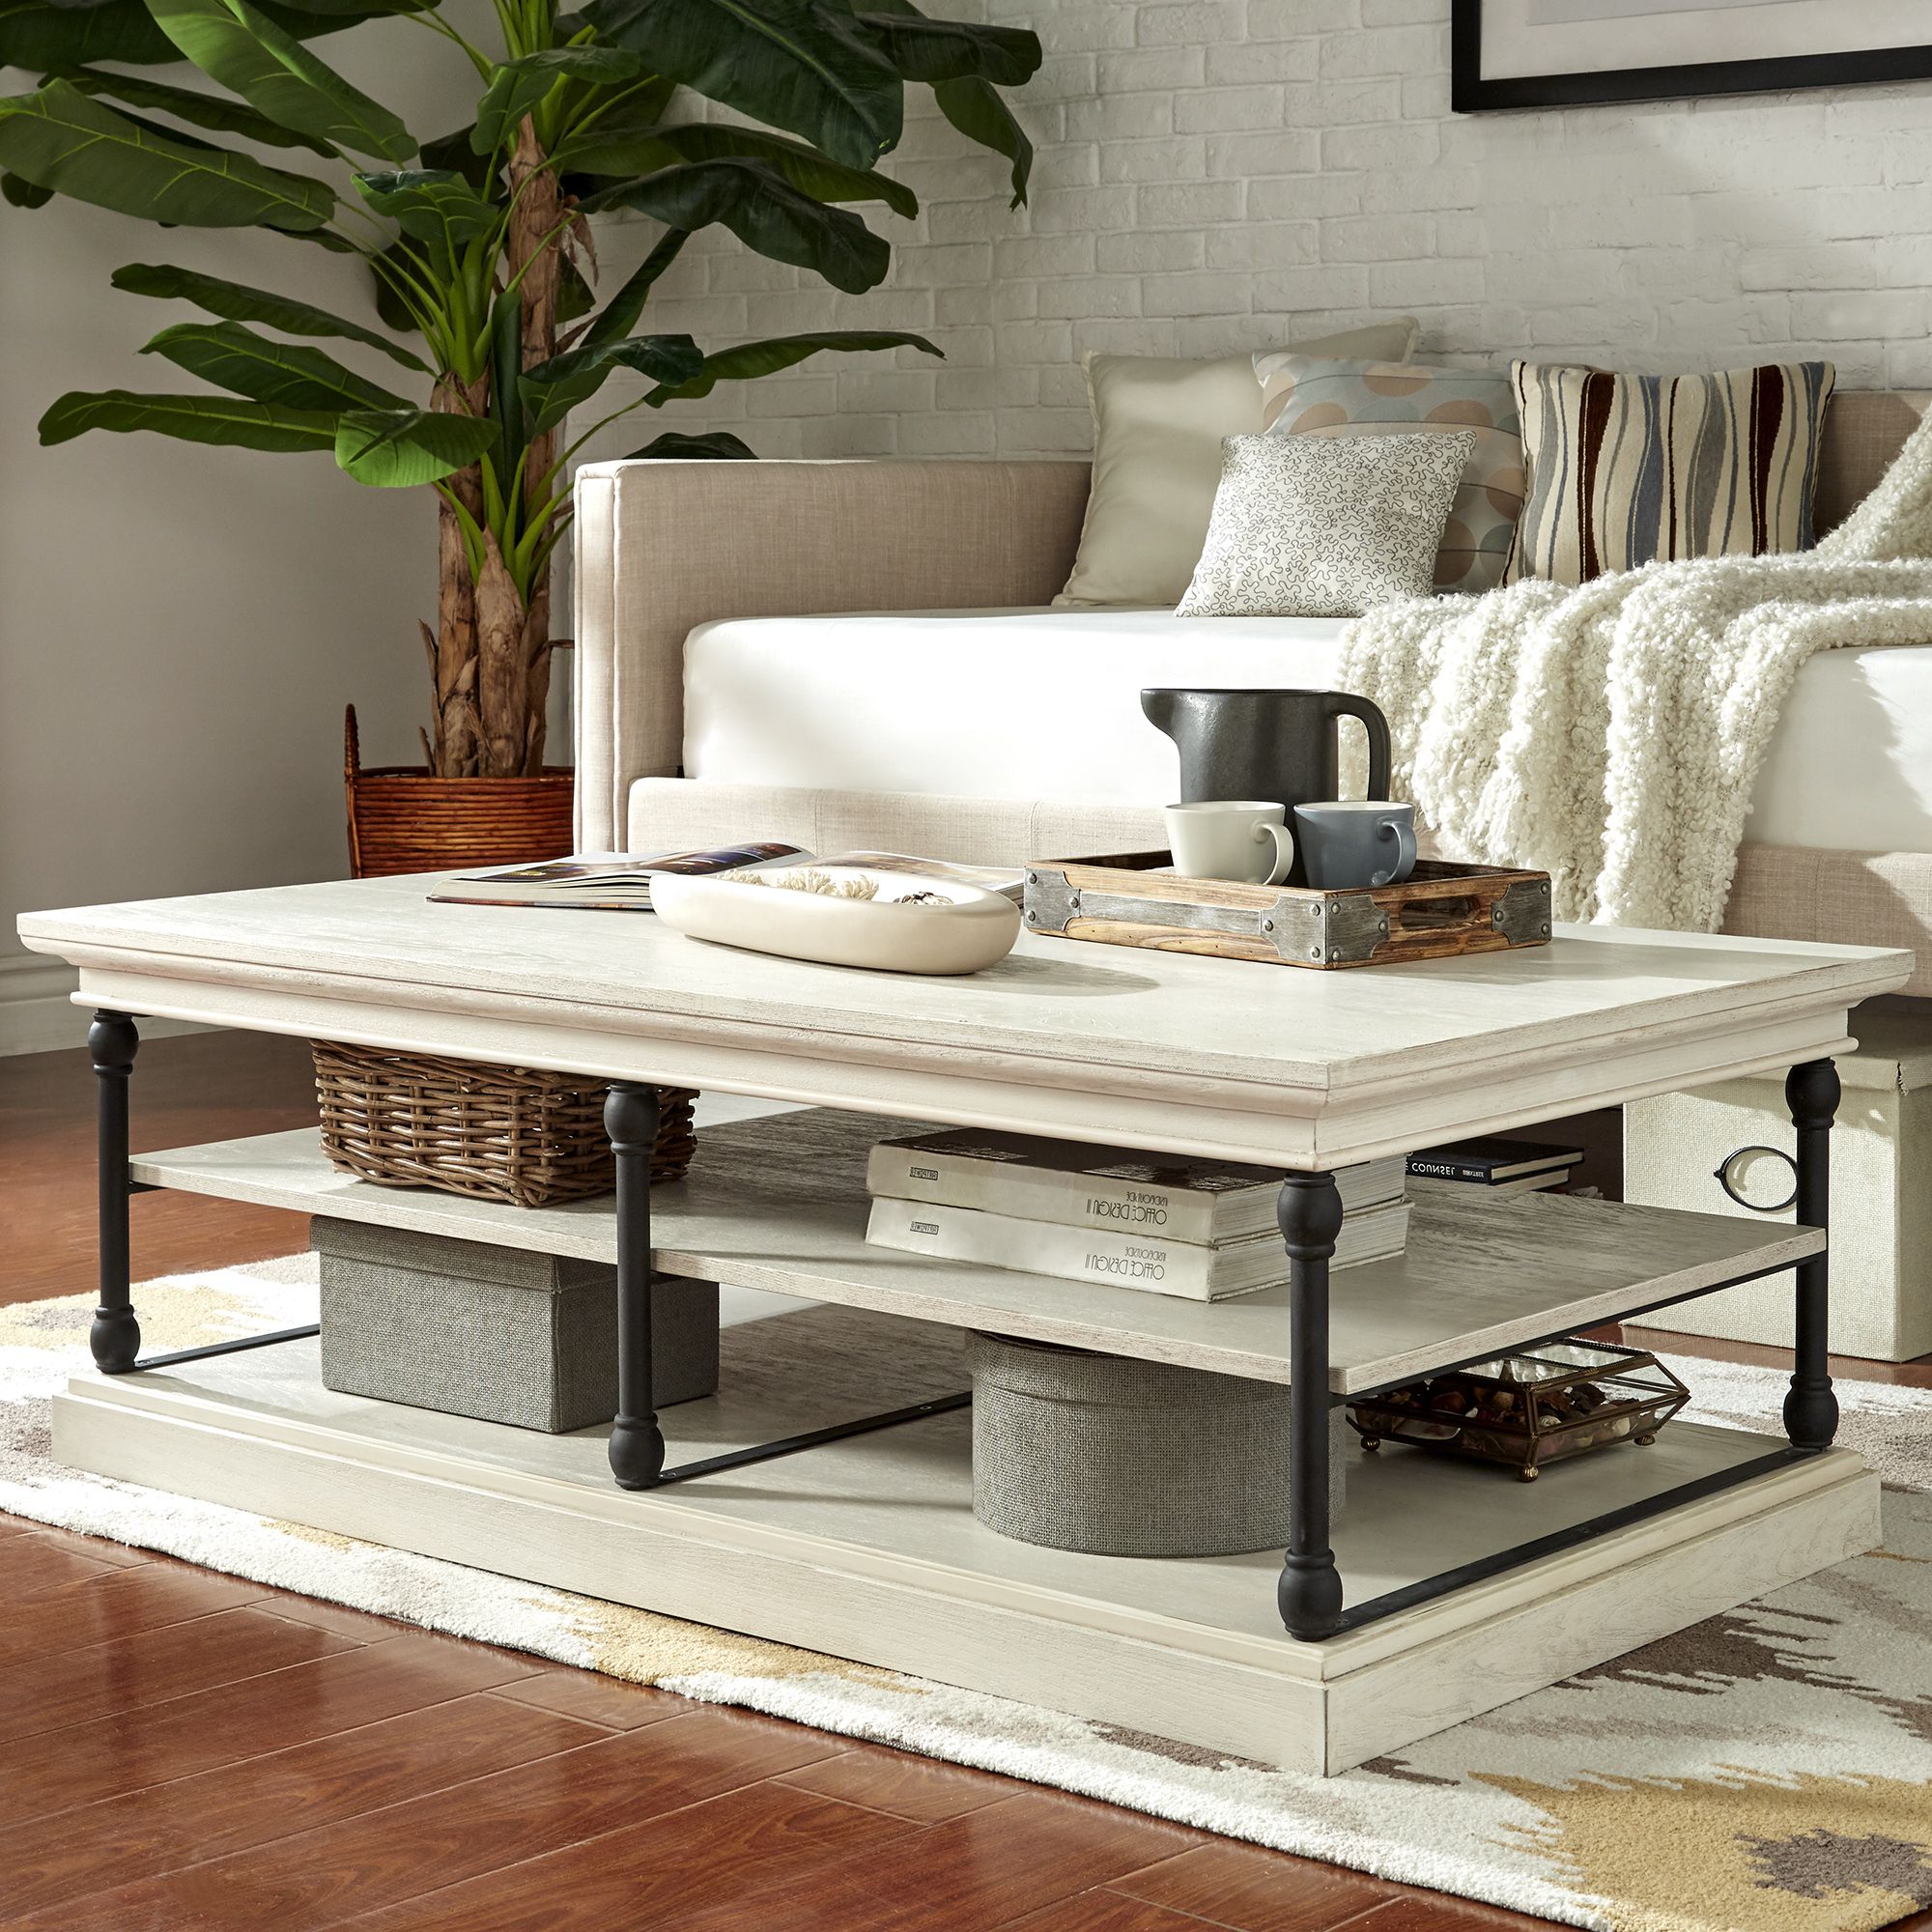 Cornice Rectangle Storage Shelf Coffee Table – Antique Within Well Known White Triangular Coffee Tables (View 17 of 20)